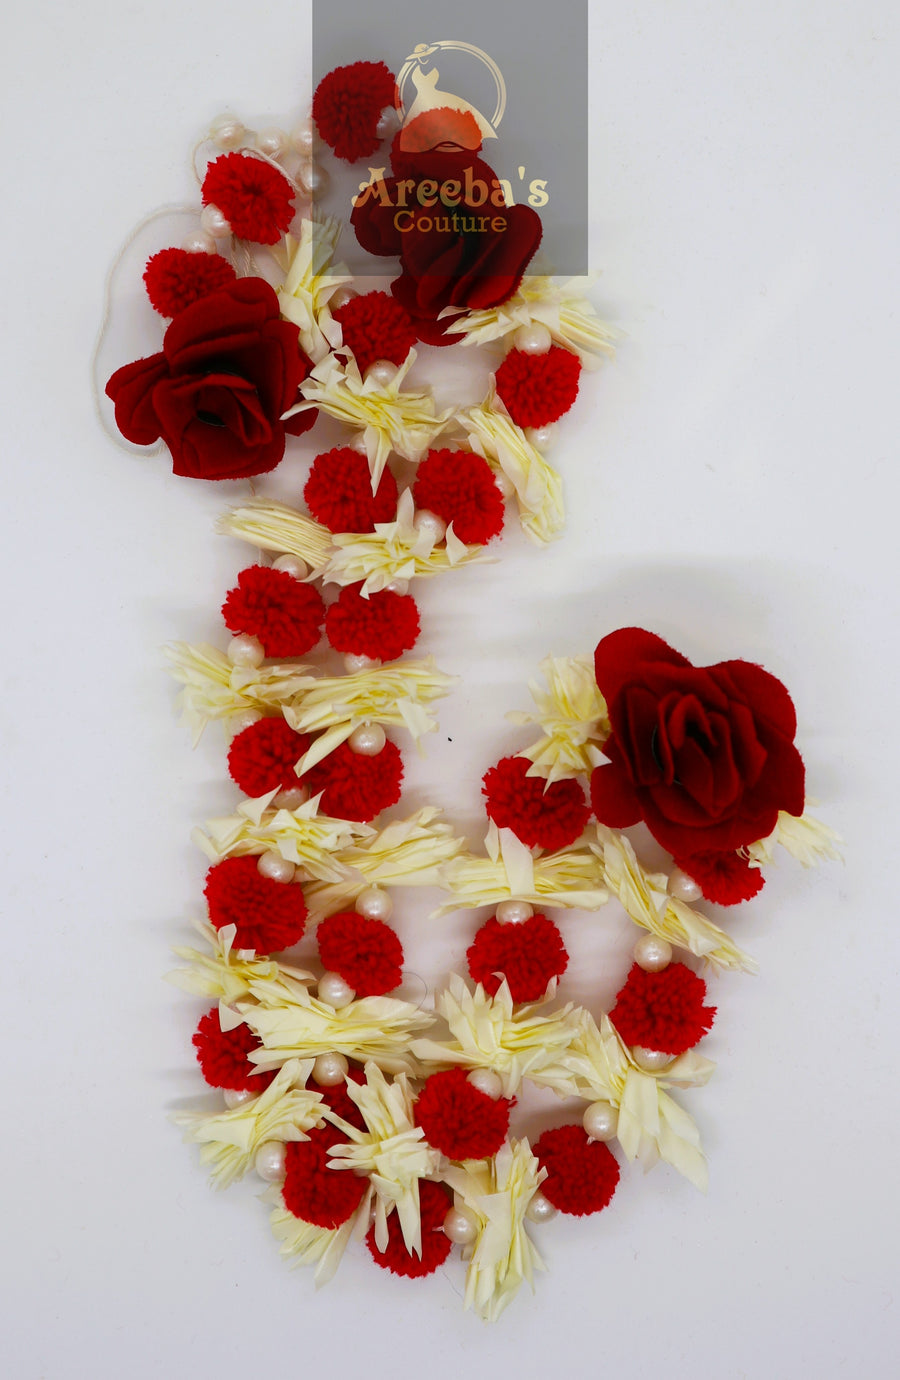 Flower Mala for hair- Areeba's Couture